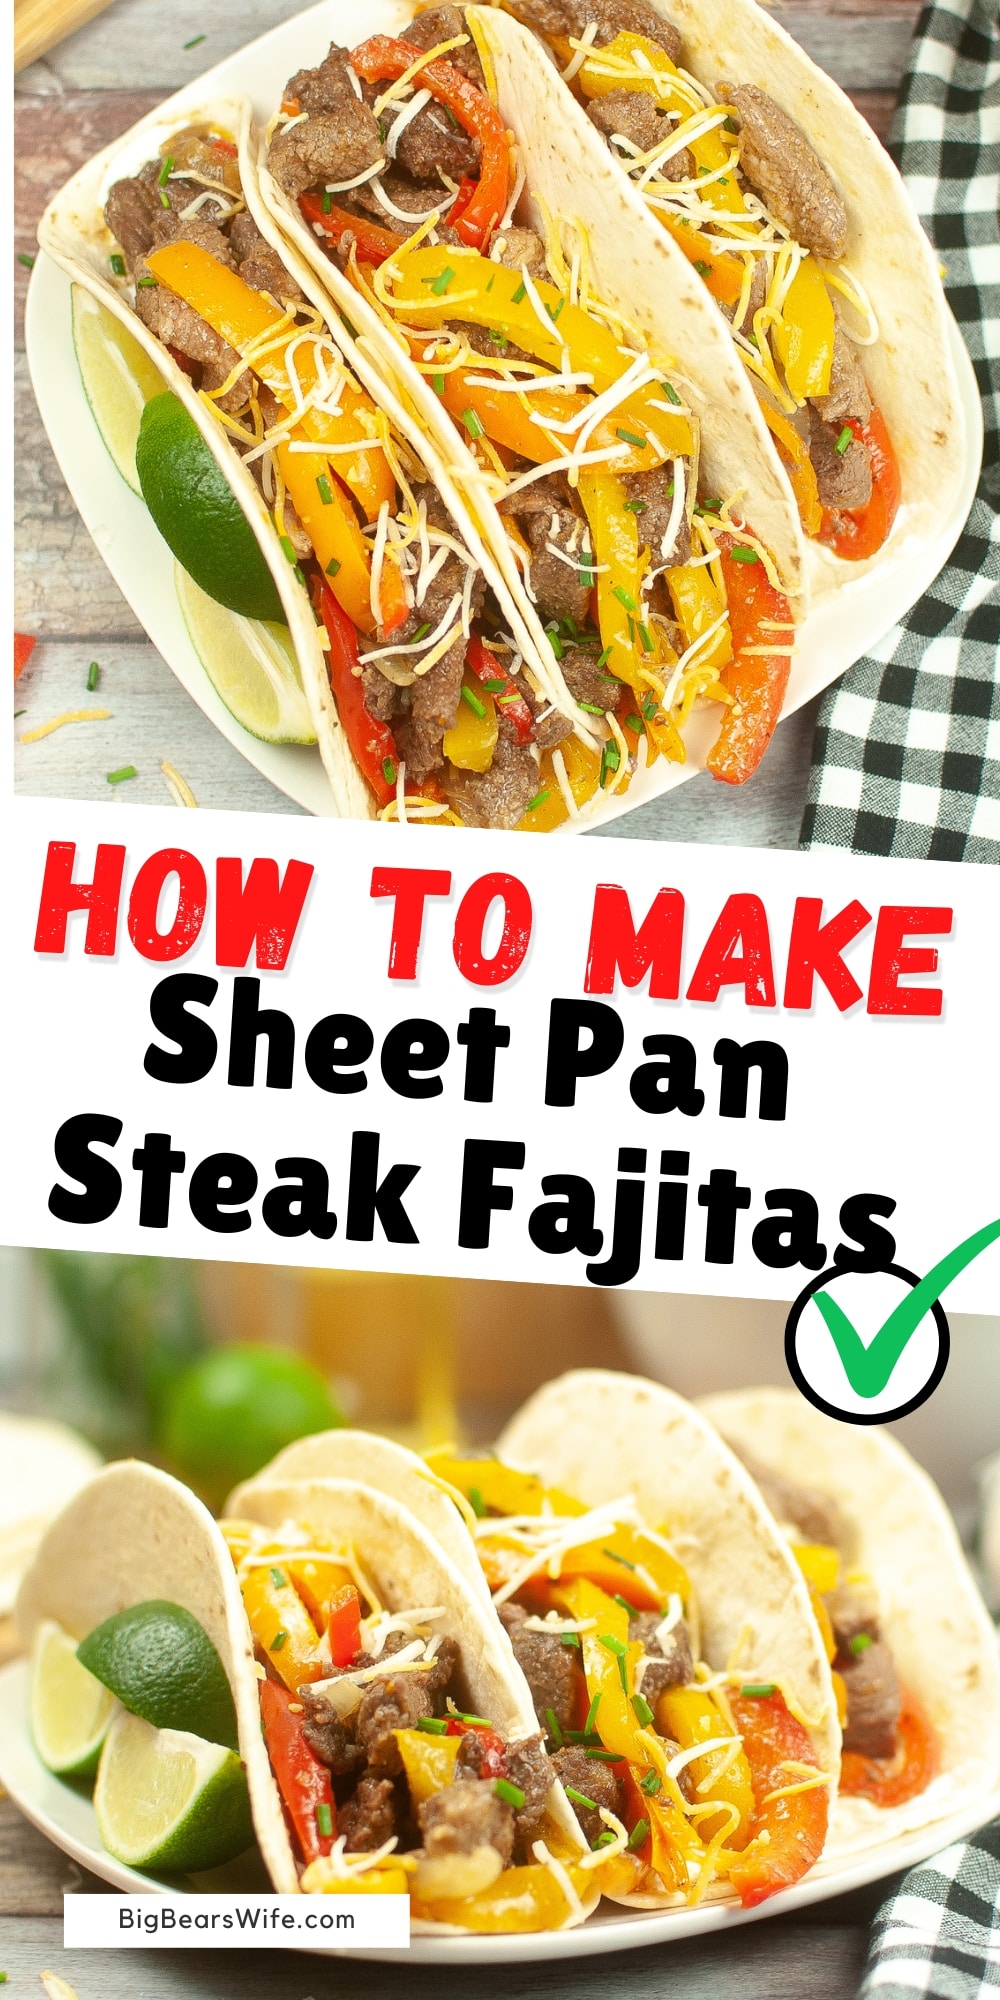 Sheet pan steak fajitas are the perfect weeknight dinner solution. This recipe is easy to prepare and clean up, making it a favorite for busy families. With deliciously seasoned steak, fresh vegetables, and warm tortillas, this meal is sure to be a hit! via @bigbearswife